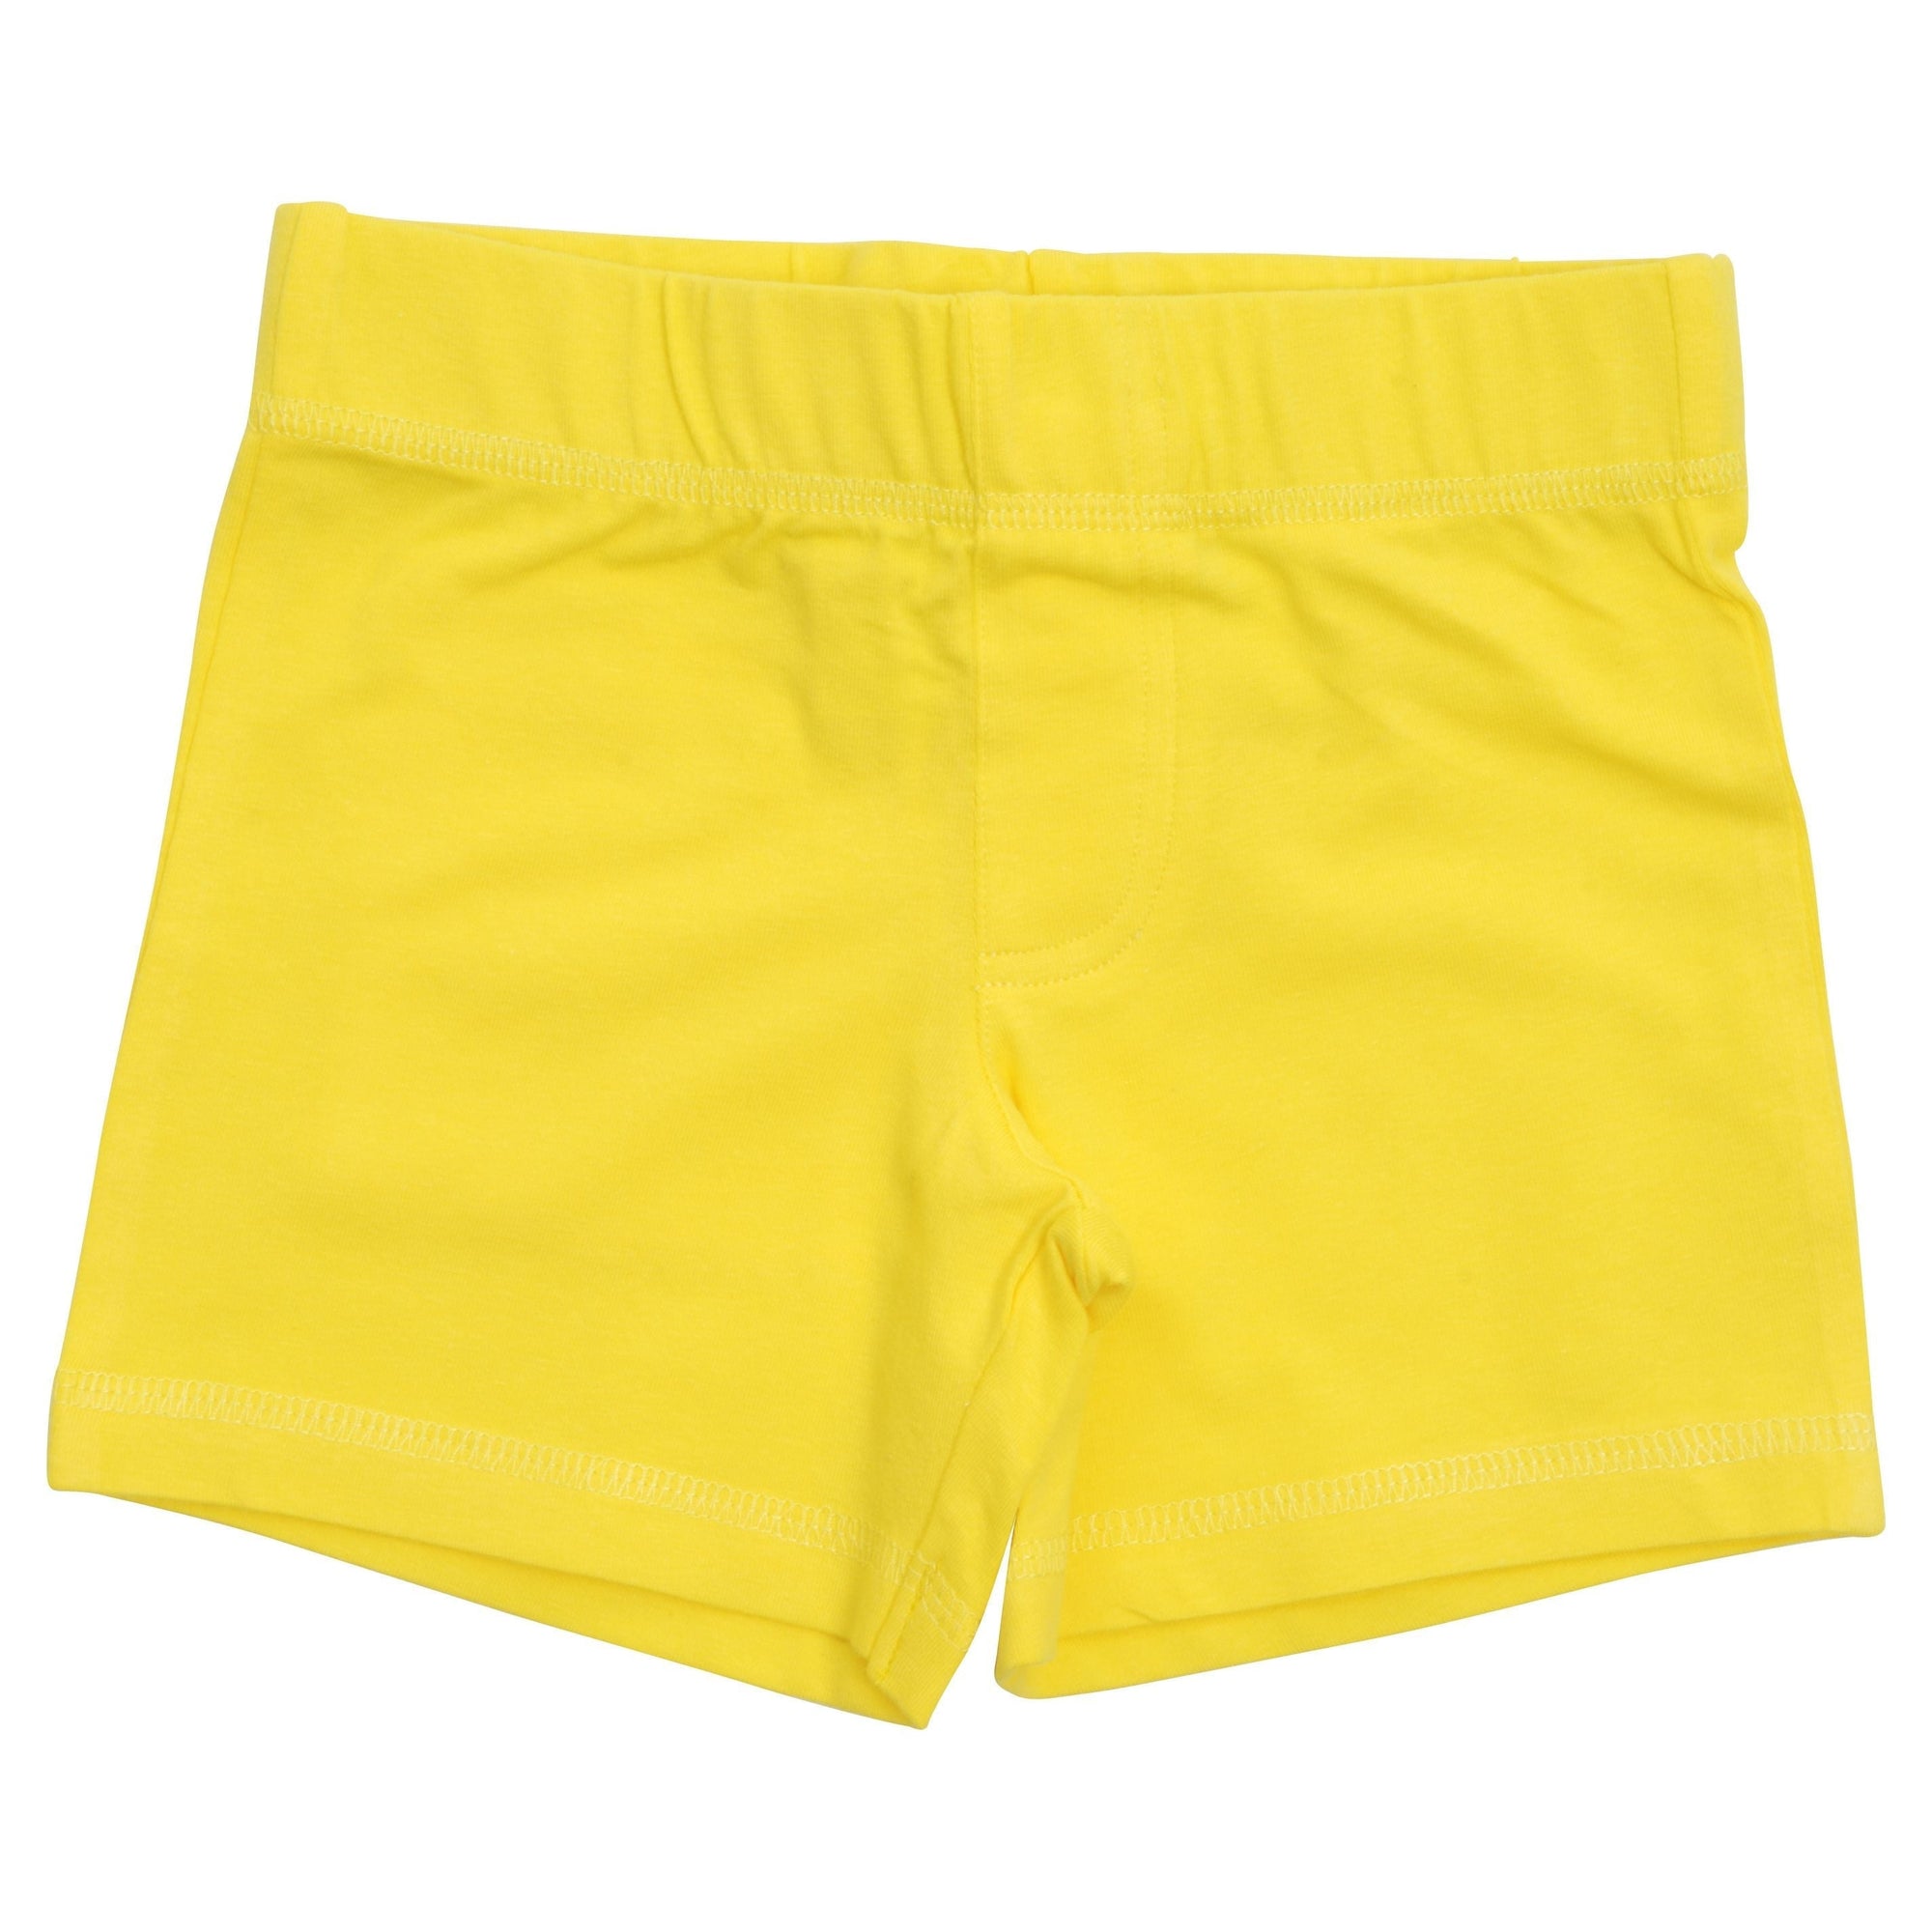 Buttercup Shorts - 2 Left Size 10-12 & 12-14 years-More Than A Fling-Modern Rascals